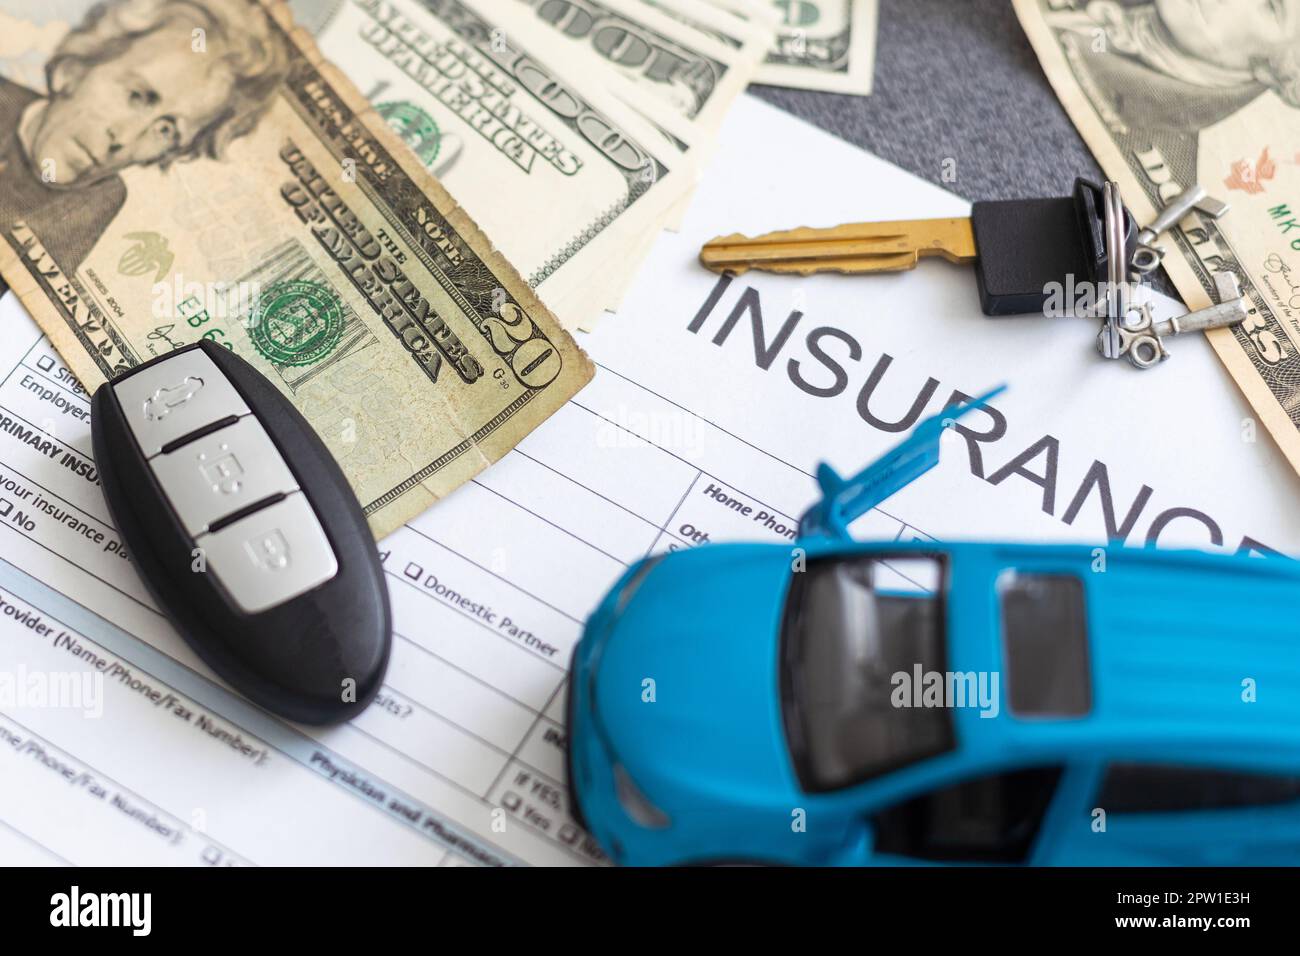 Car insurance form with car key and toy car Stock Photo - Alamy